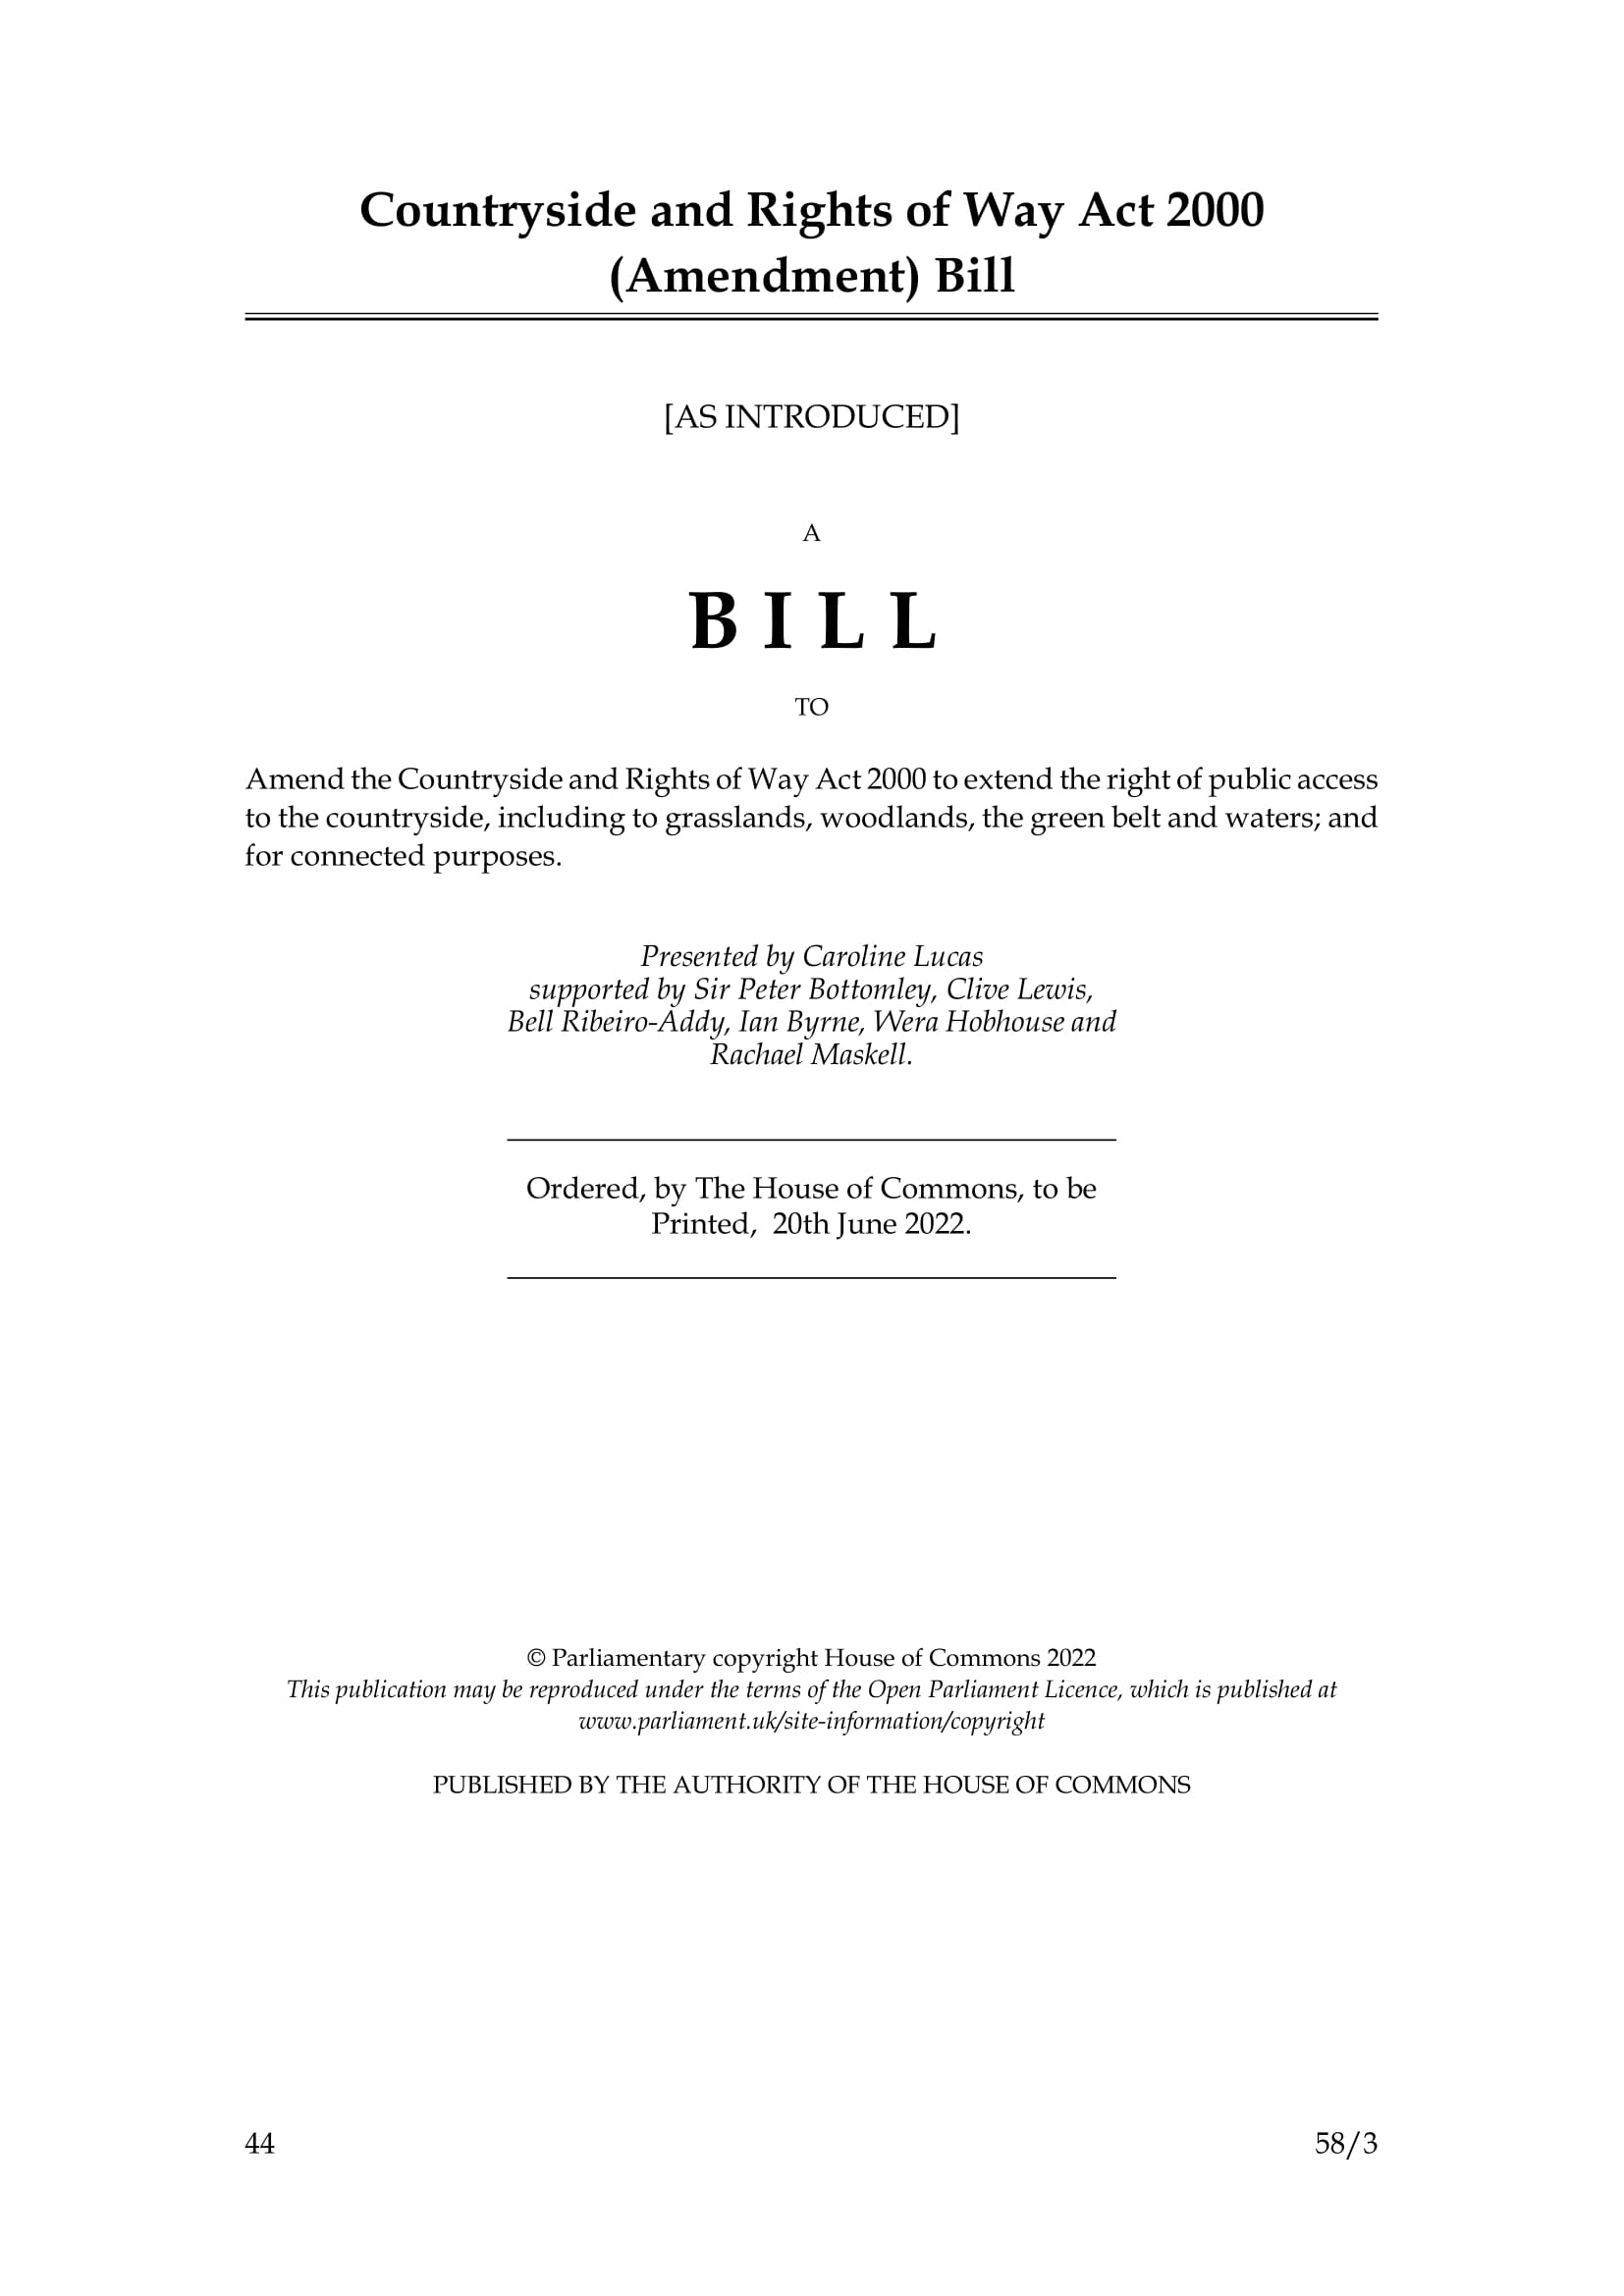 The Countryside Rights of Way Act 2000 (Amendment) Bill